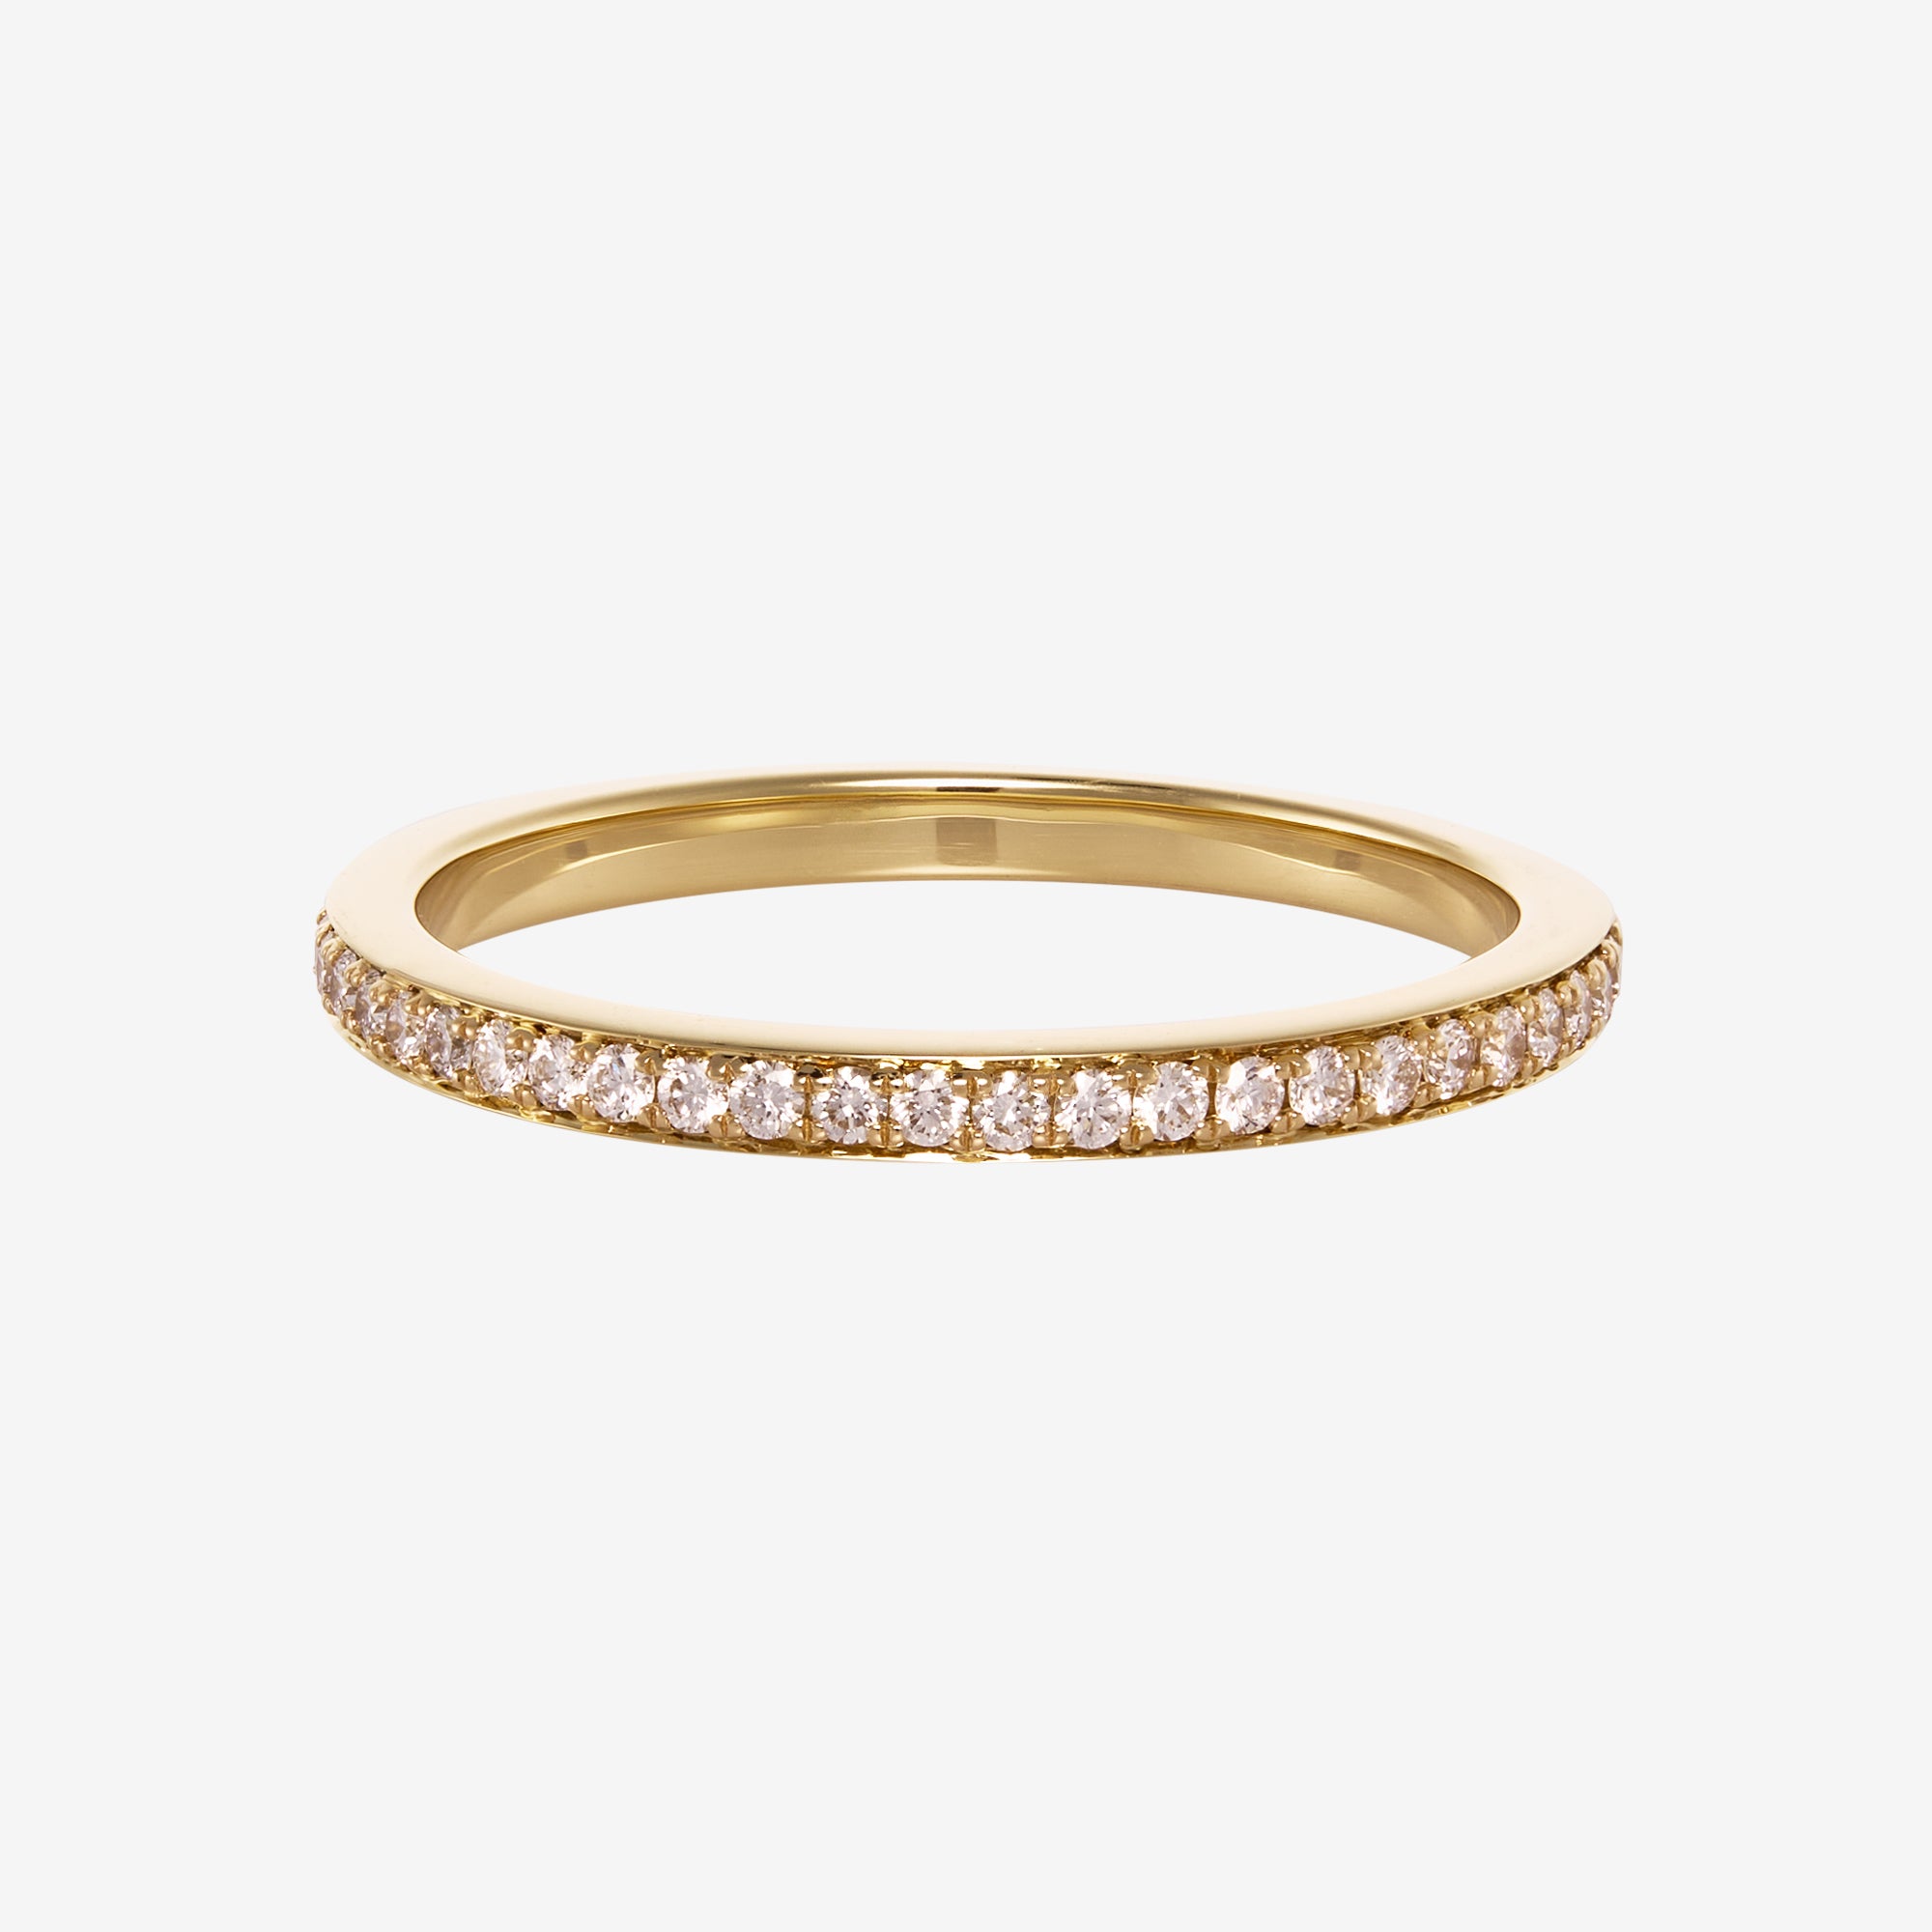 The One Pavé Ring